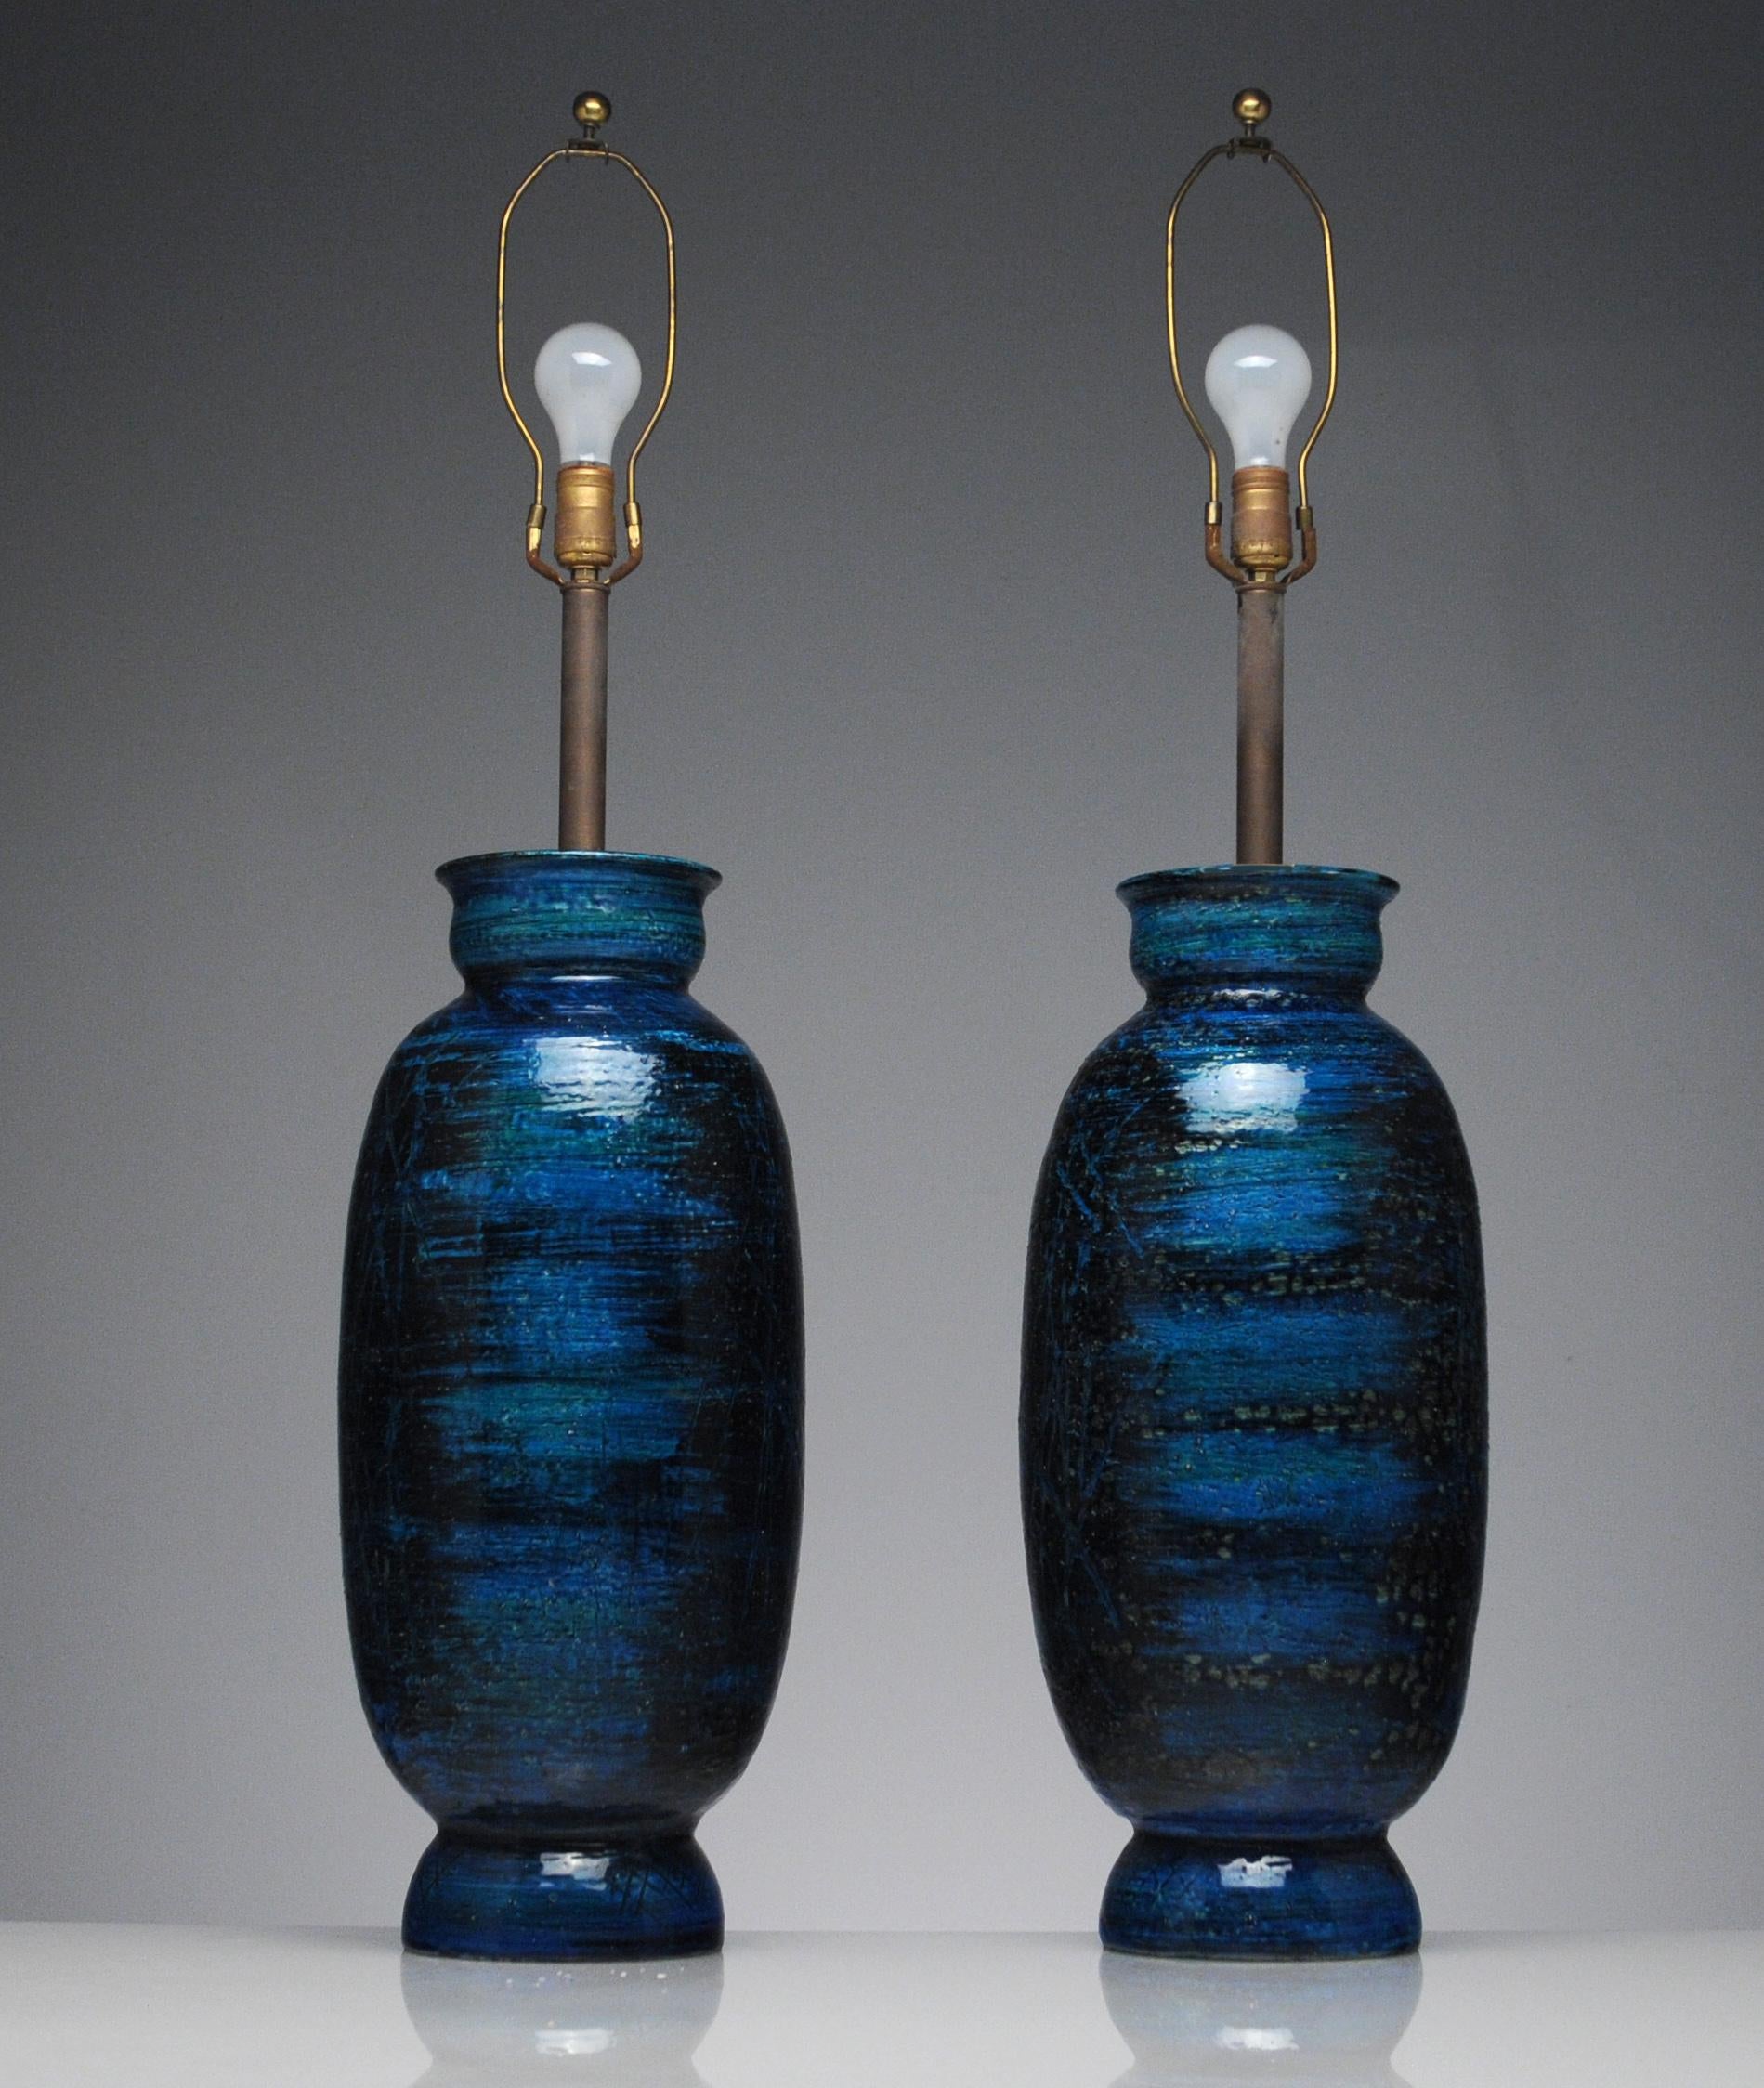 Fantastic and large pair of Italian lamps by the famed ceramicist Aldo Londi. Beautiful dark Rimini Blue glaze in the Sgraffito style. Signed to underside 1576 made in Italy. Lamps were originally purchased in New York in 1962. With shades they